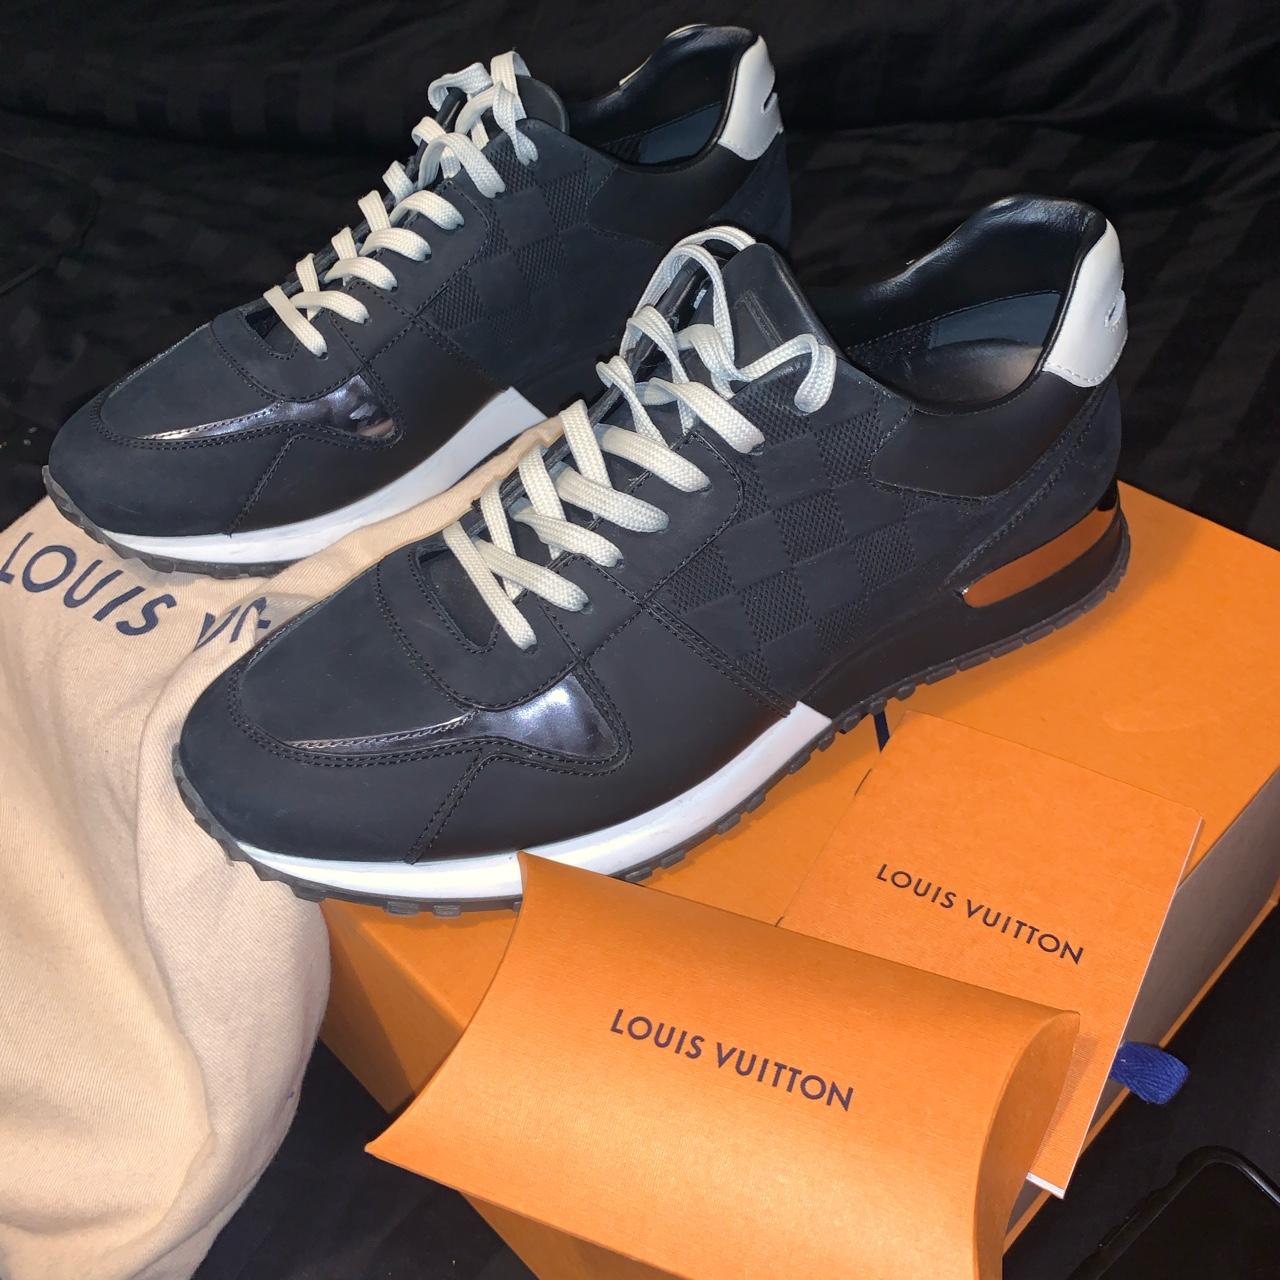 louis vuitton tennis shoes for women only